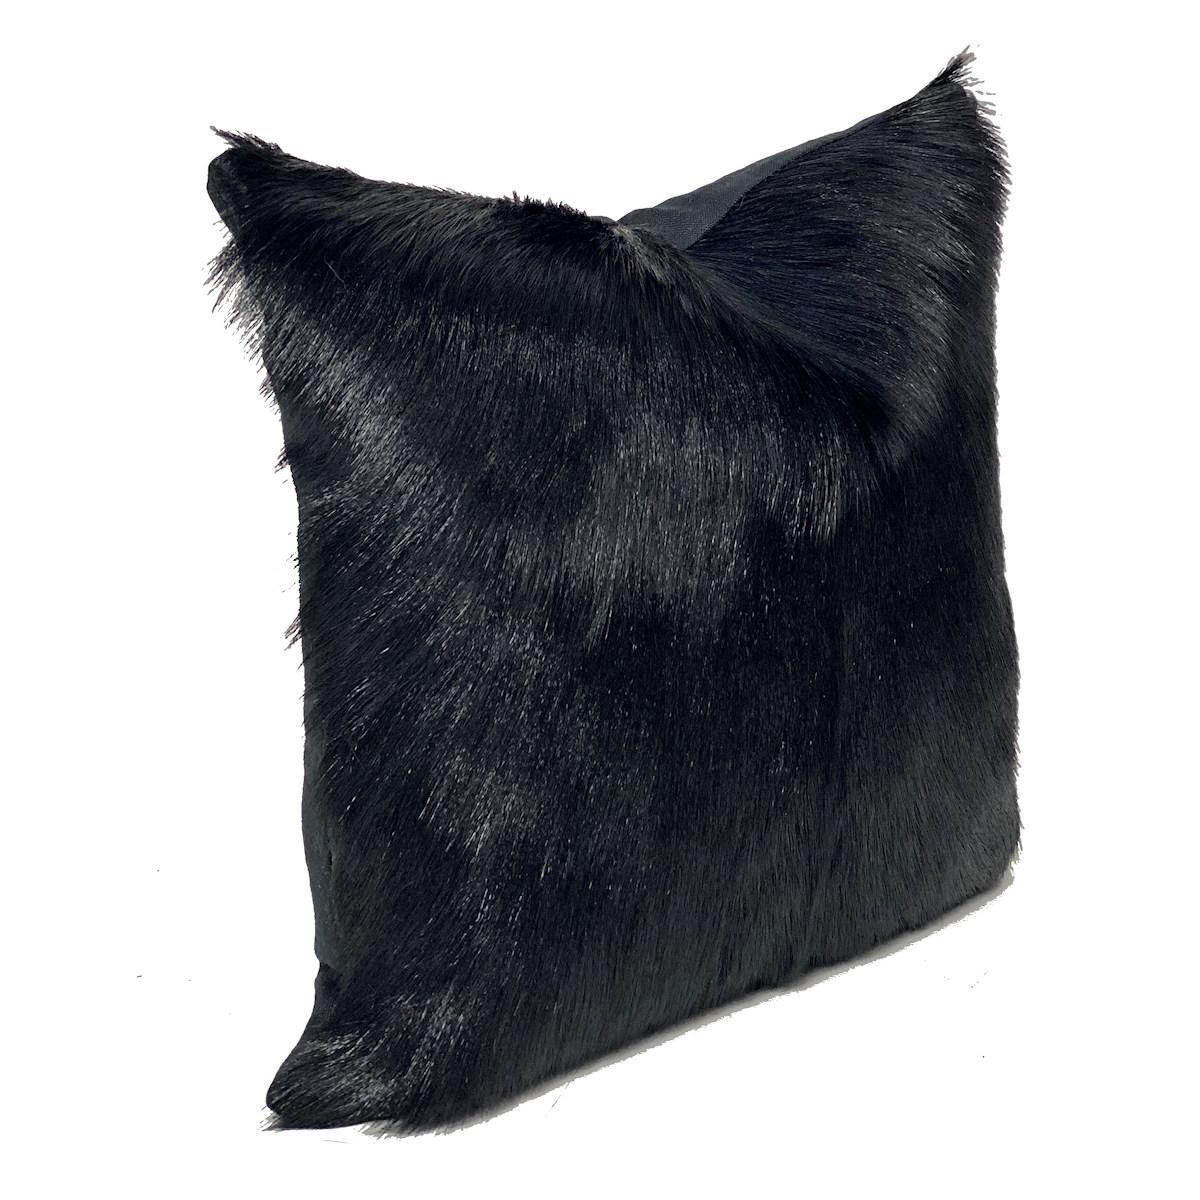 Inject refined textures to your space with this luxurious and contemporary black fur pillow hand-crafted from genuine goatskin.

With irresistible and shiny black fur, makes each goatskin pillow remarkably beautiful, preserving the natural and